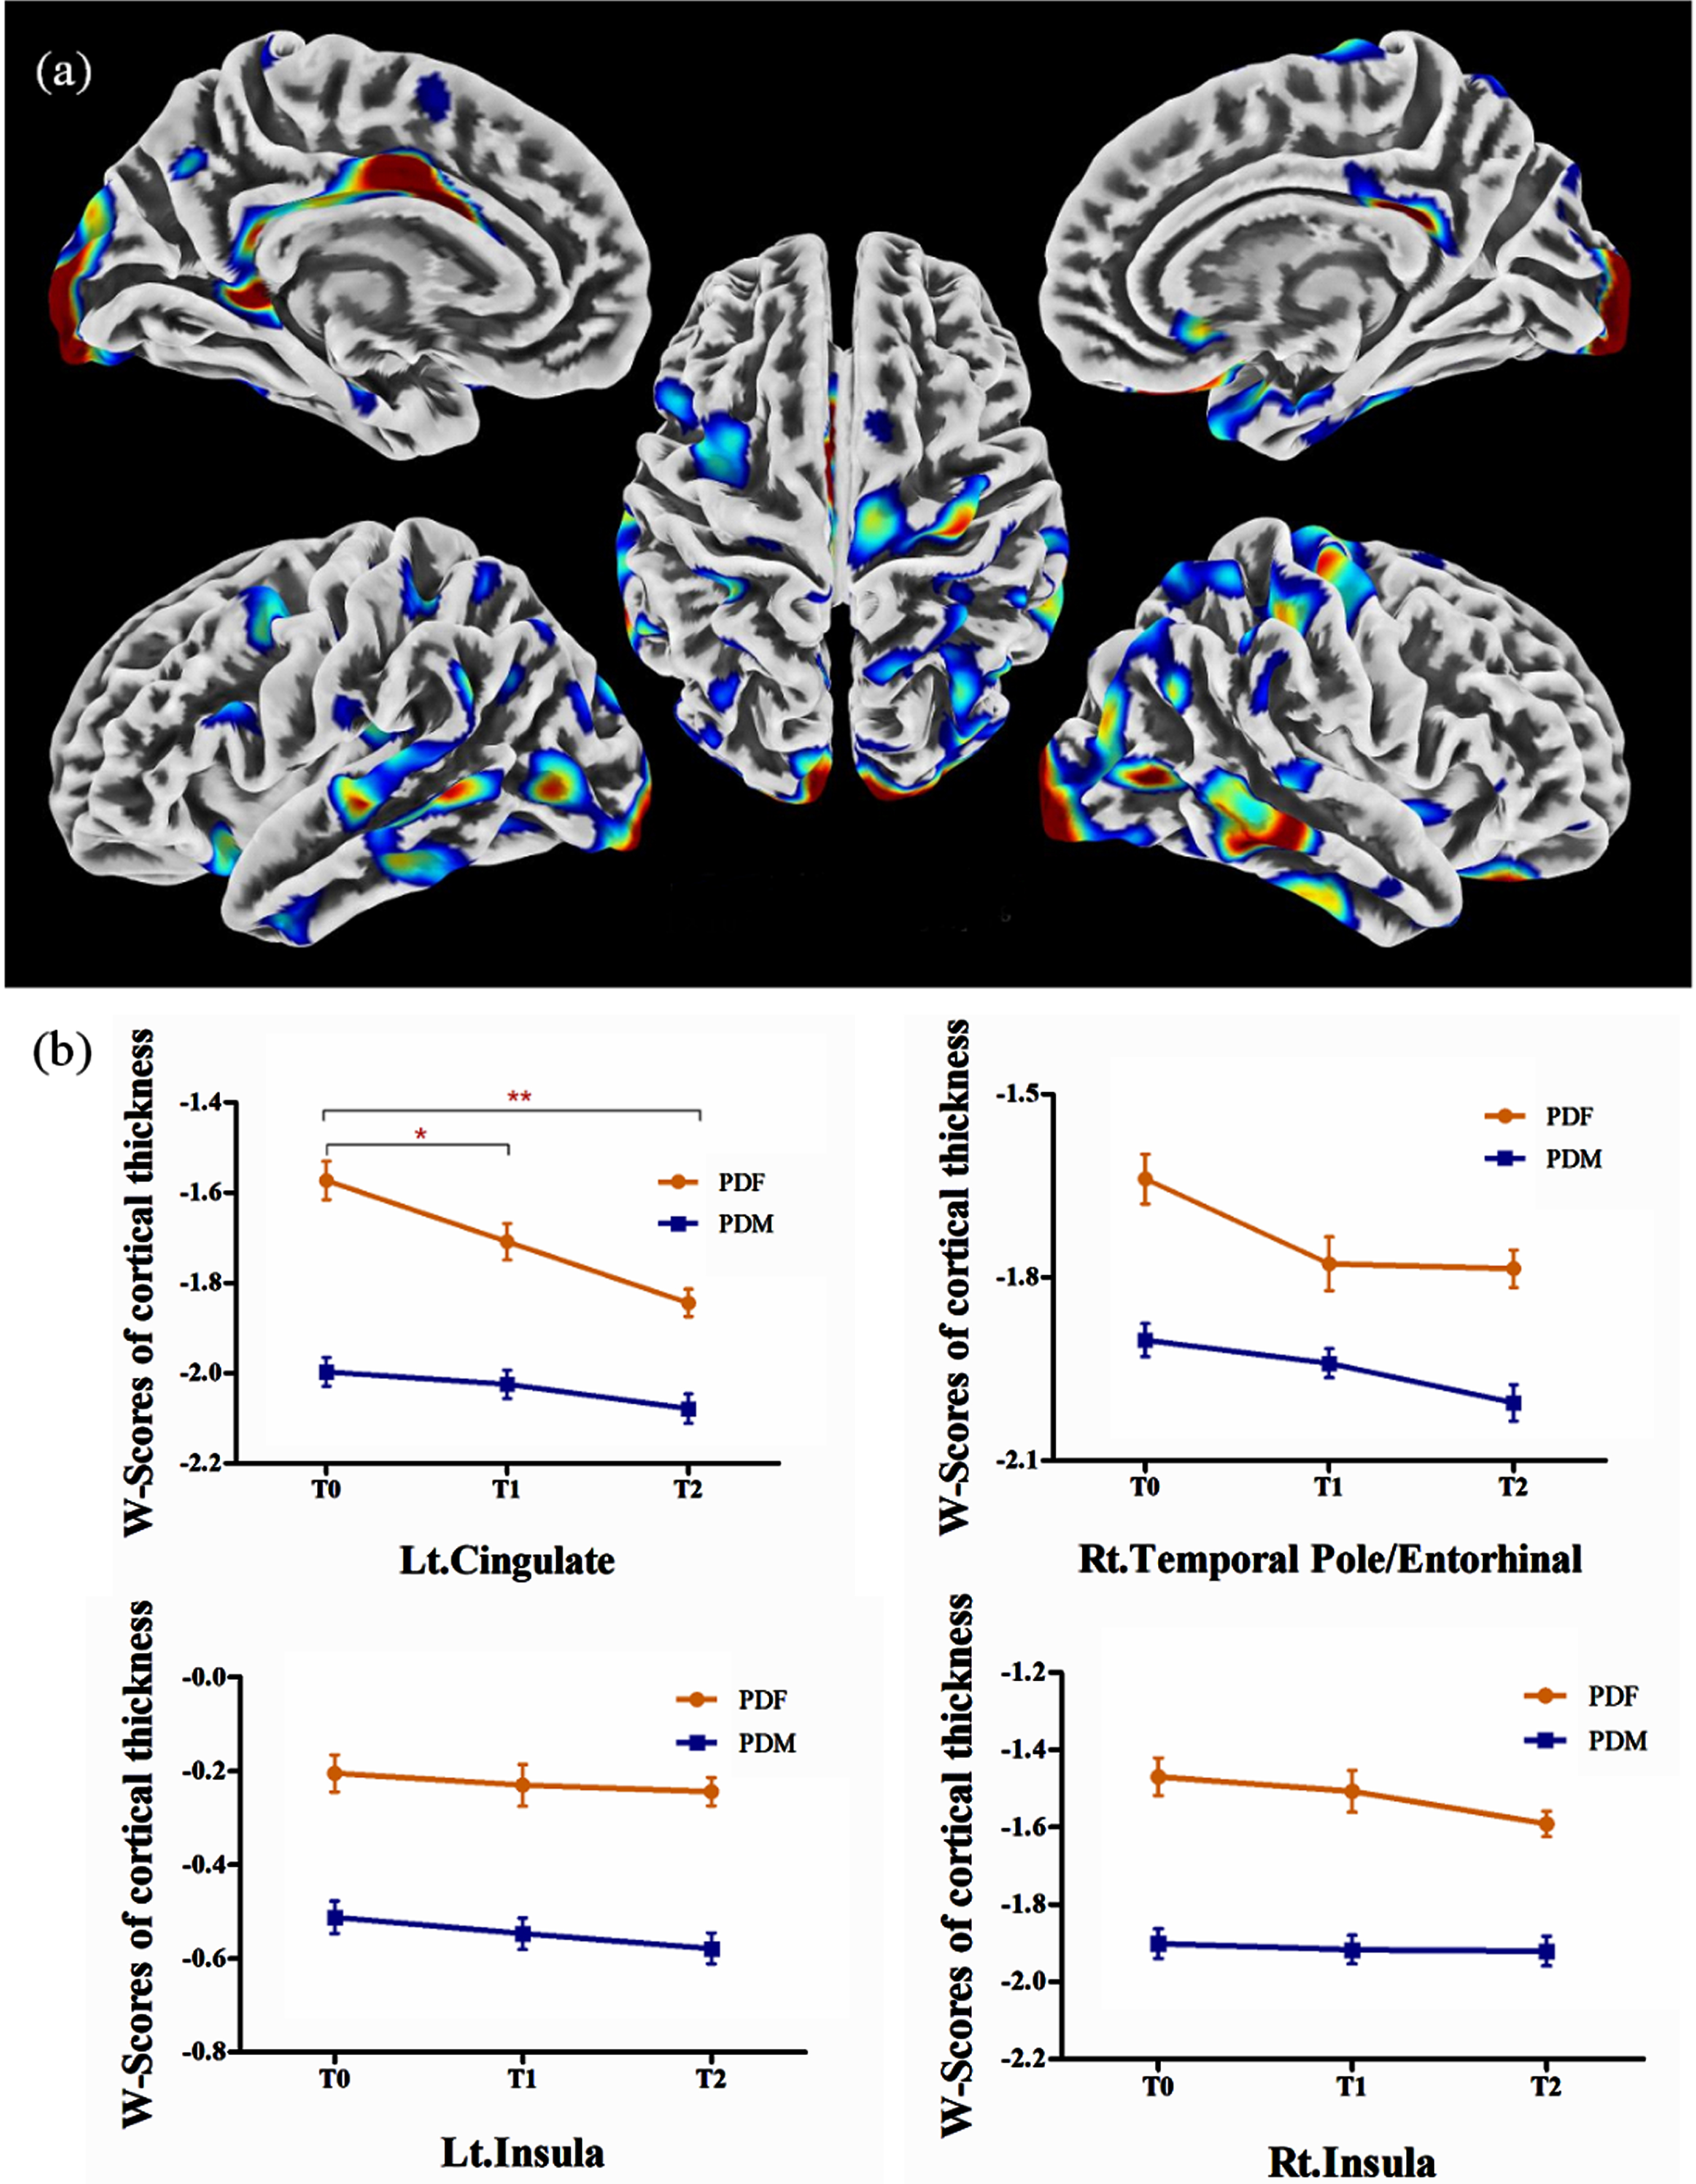 (a) Brain regions showed lower cortical thickness in males than in females in PD group 1; (b) in PD group 2, significantly lower cortical thickness in males than in females was observed in the left cingulate, the right temporal pole/entorhinal, and the bilateral insula, while no significant sex difference in longitudinal changes was observed. PDF, female PD patients; PDM, male PD patients; T0, baseline; T1, 12-month follow-up; T2, 24-month follow-up; Lt., left; Rt., right. *p < 0.05. **p < 0.001.